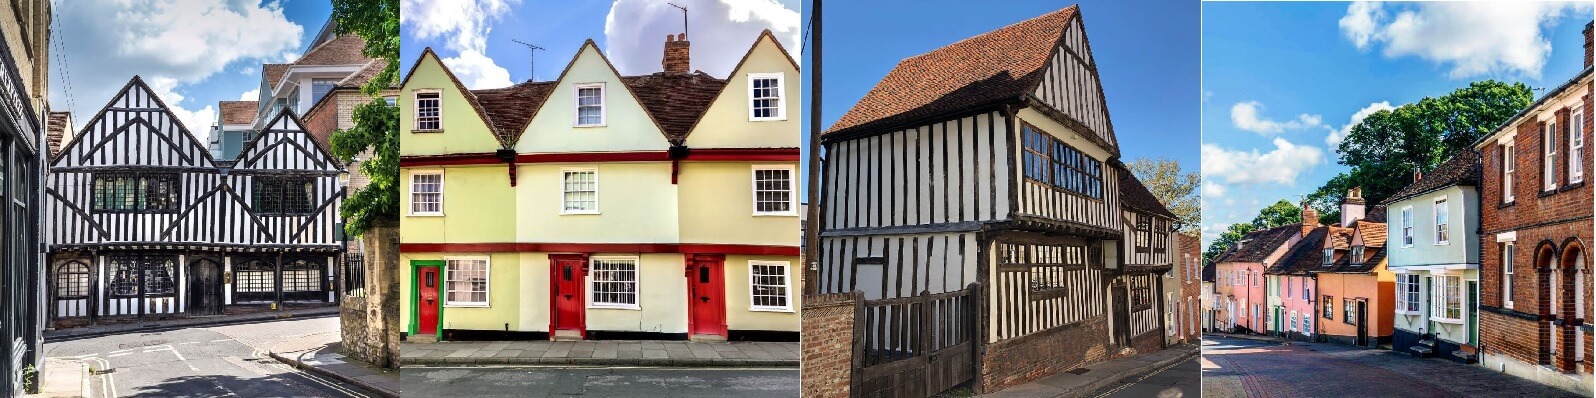 4 images of tudor buildings in the Dutch Quarter residential area of Colchester